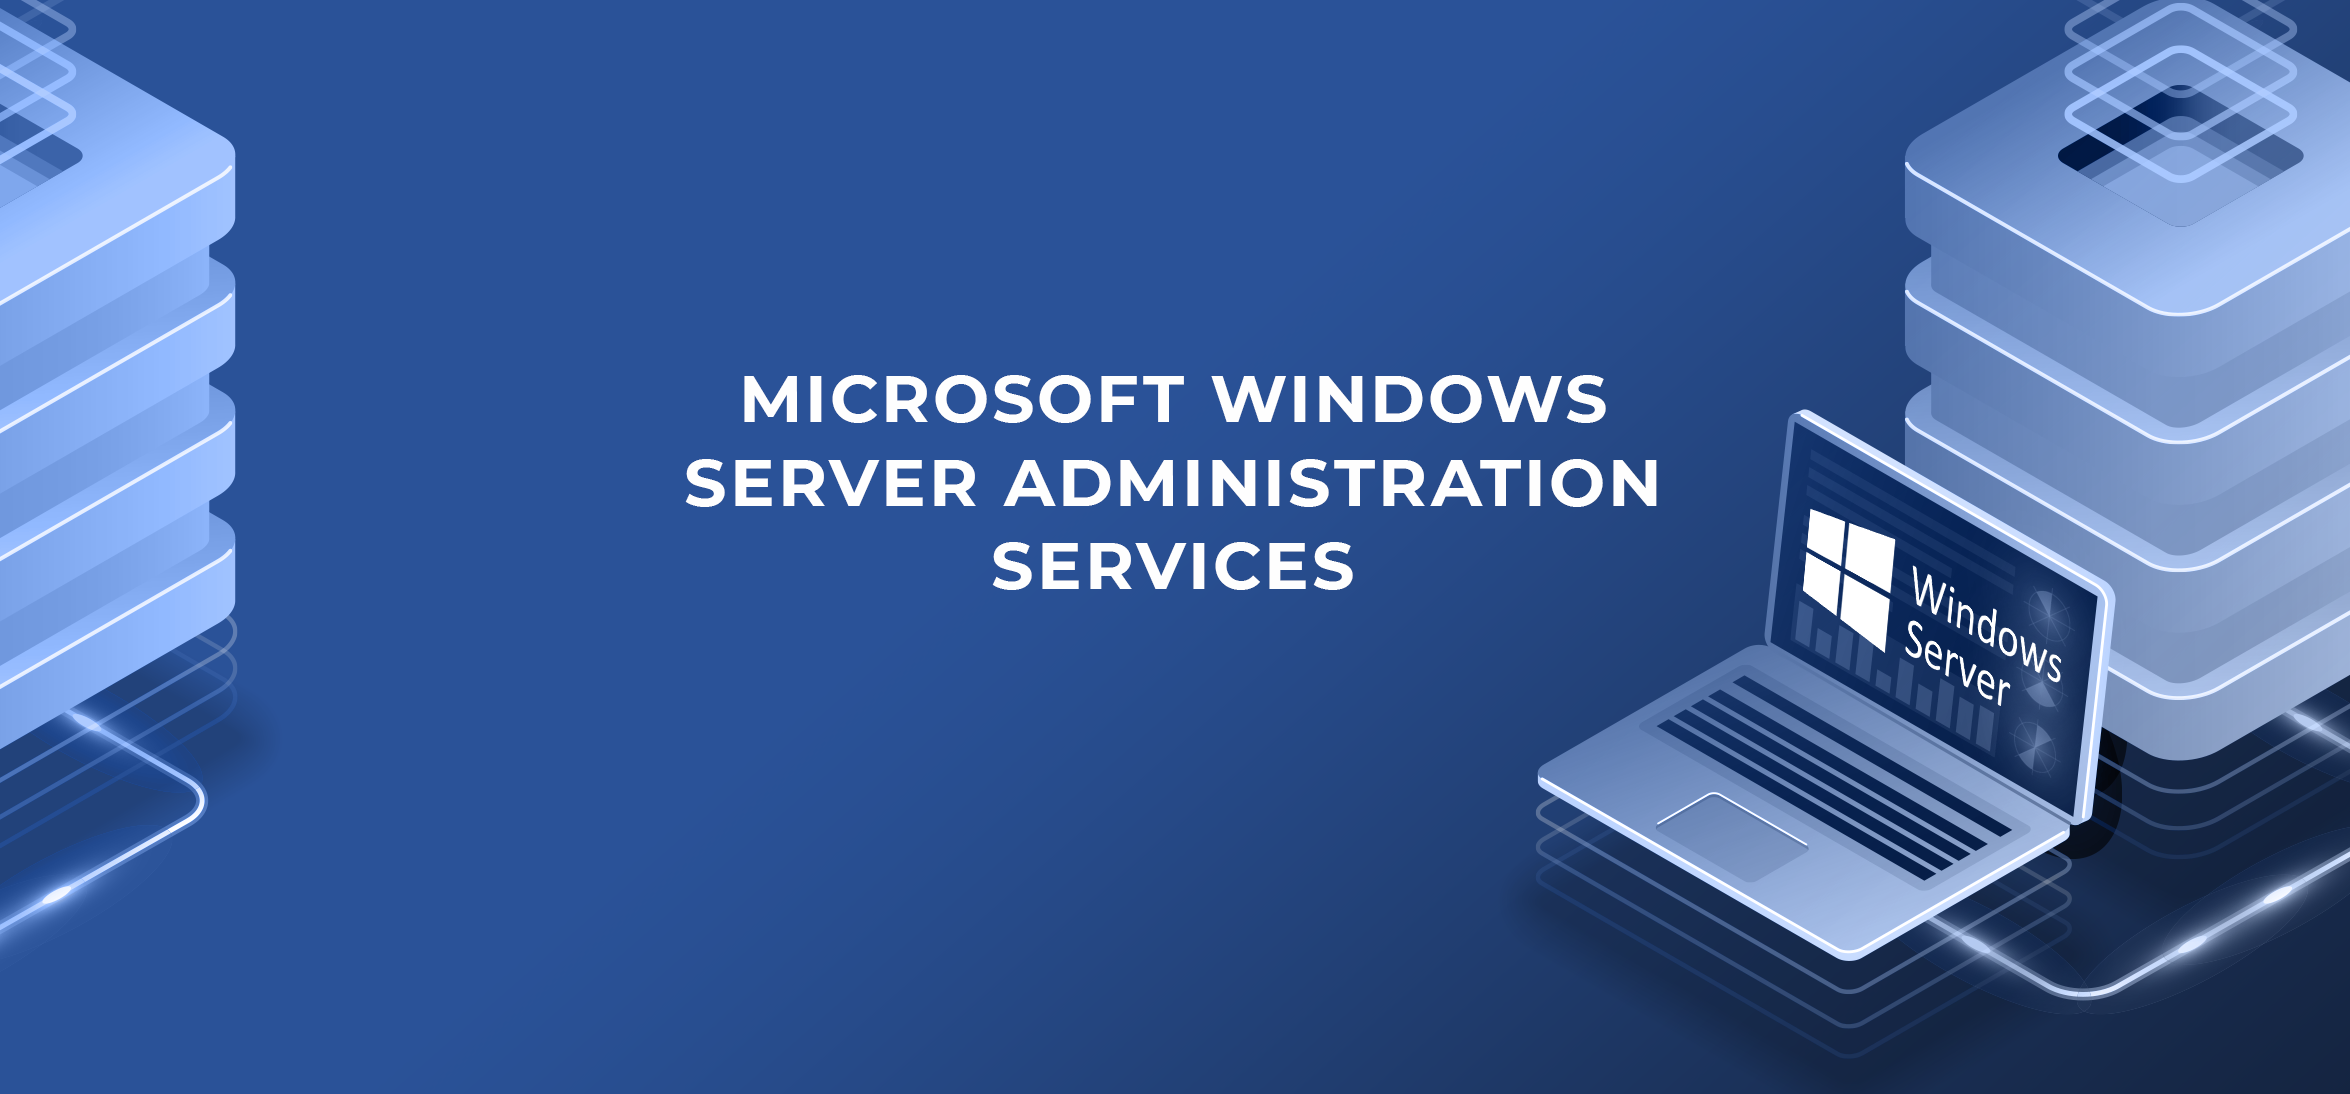 Effective Windows Server Administration and Support Solution Provider in Cardiff By The Sea CA, 92007